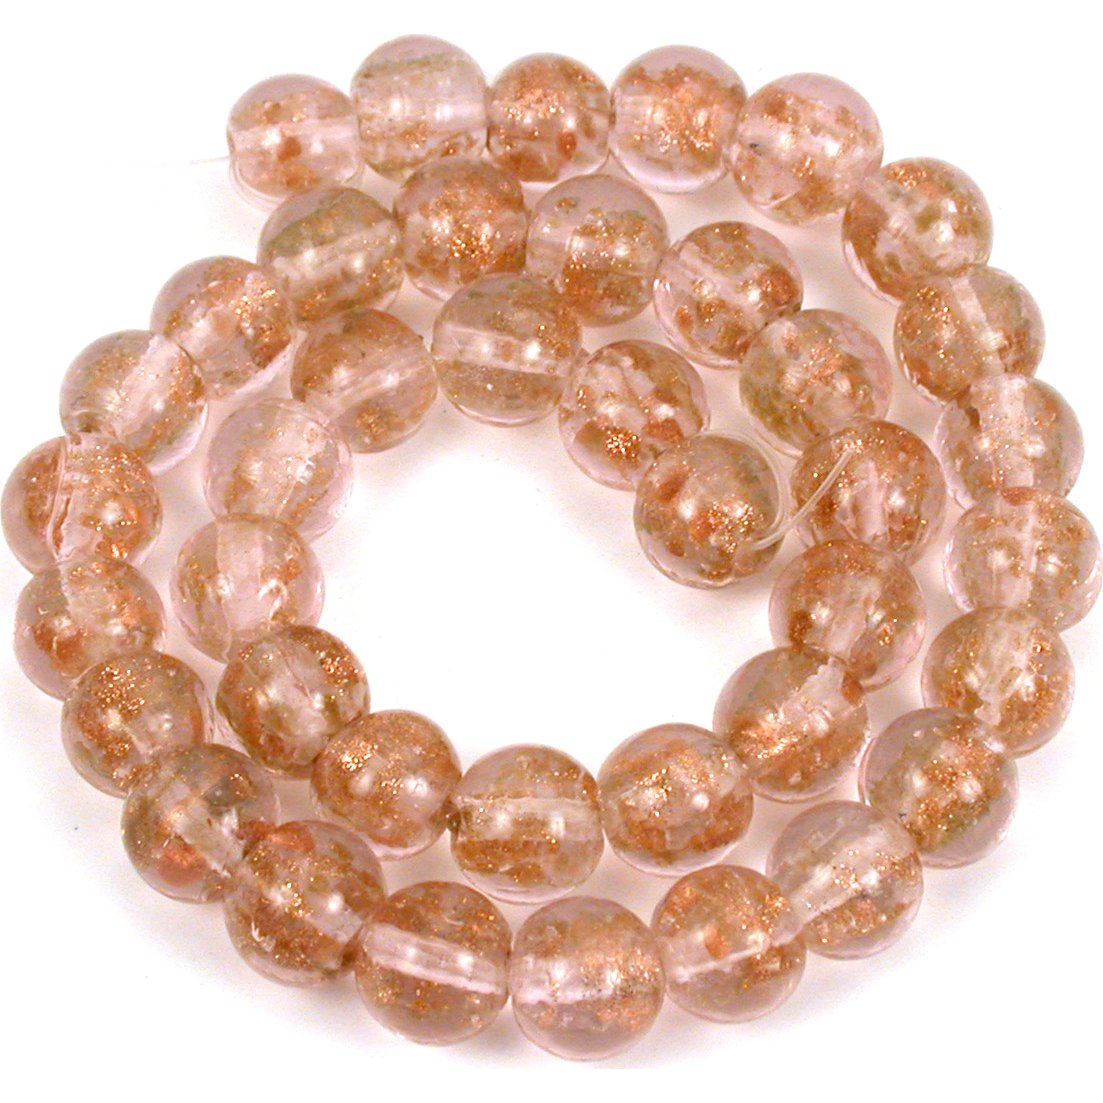 Round Gold Foil Glass Beads Pink 1 Strand